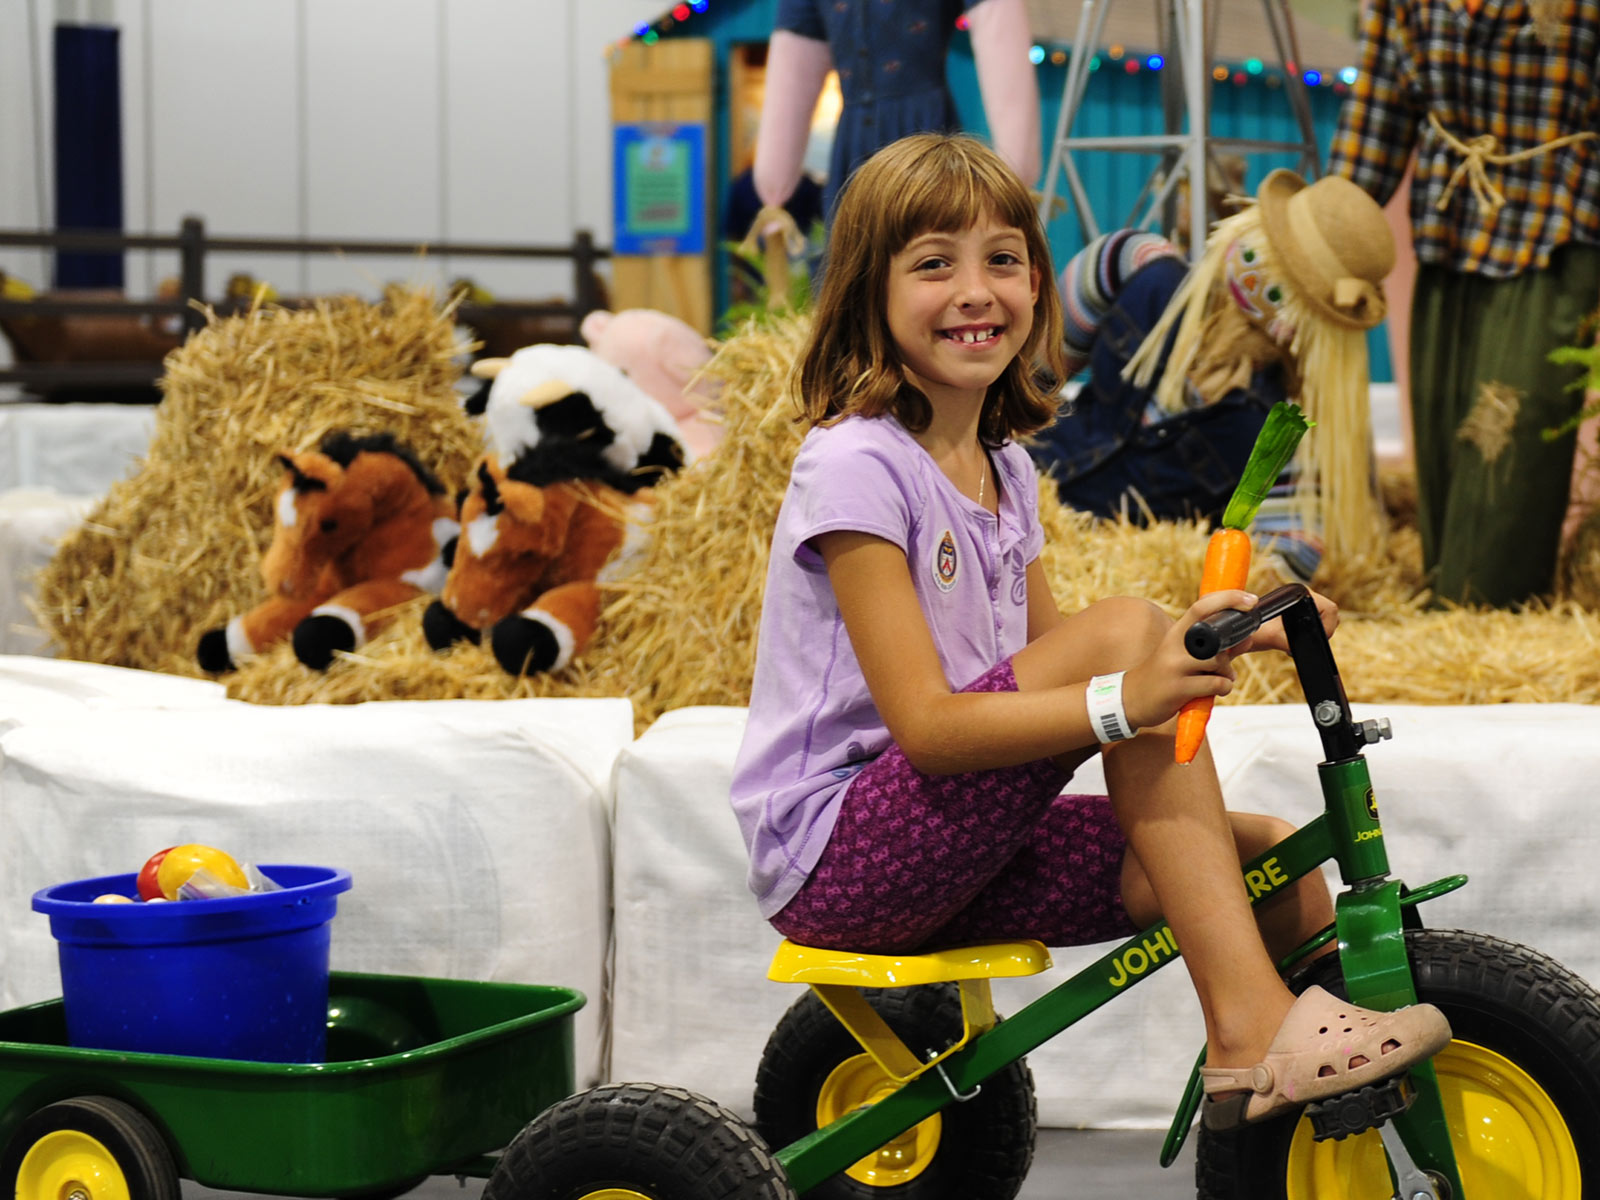 Image of a girl sitting on a John Deer tricycle in part of the Farm exhibit.